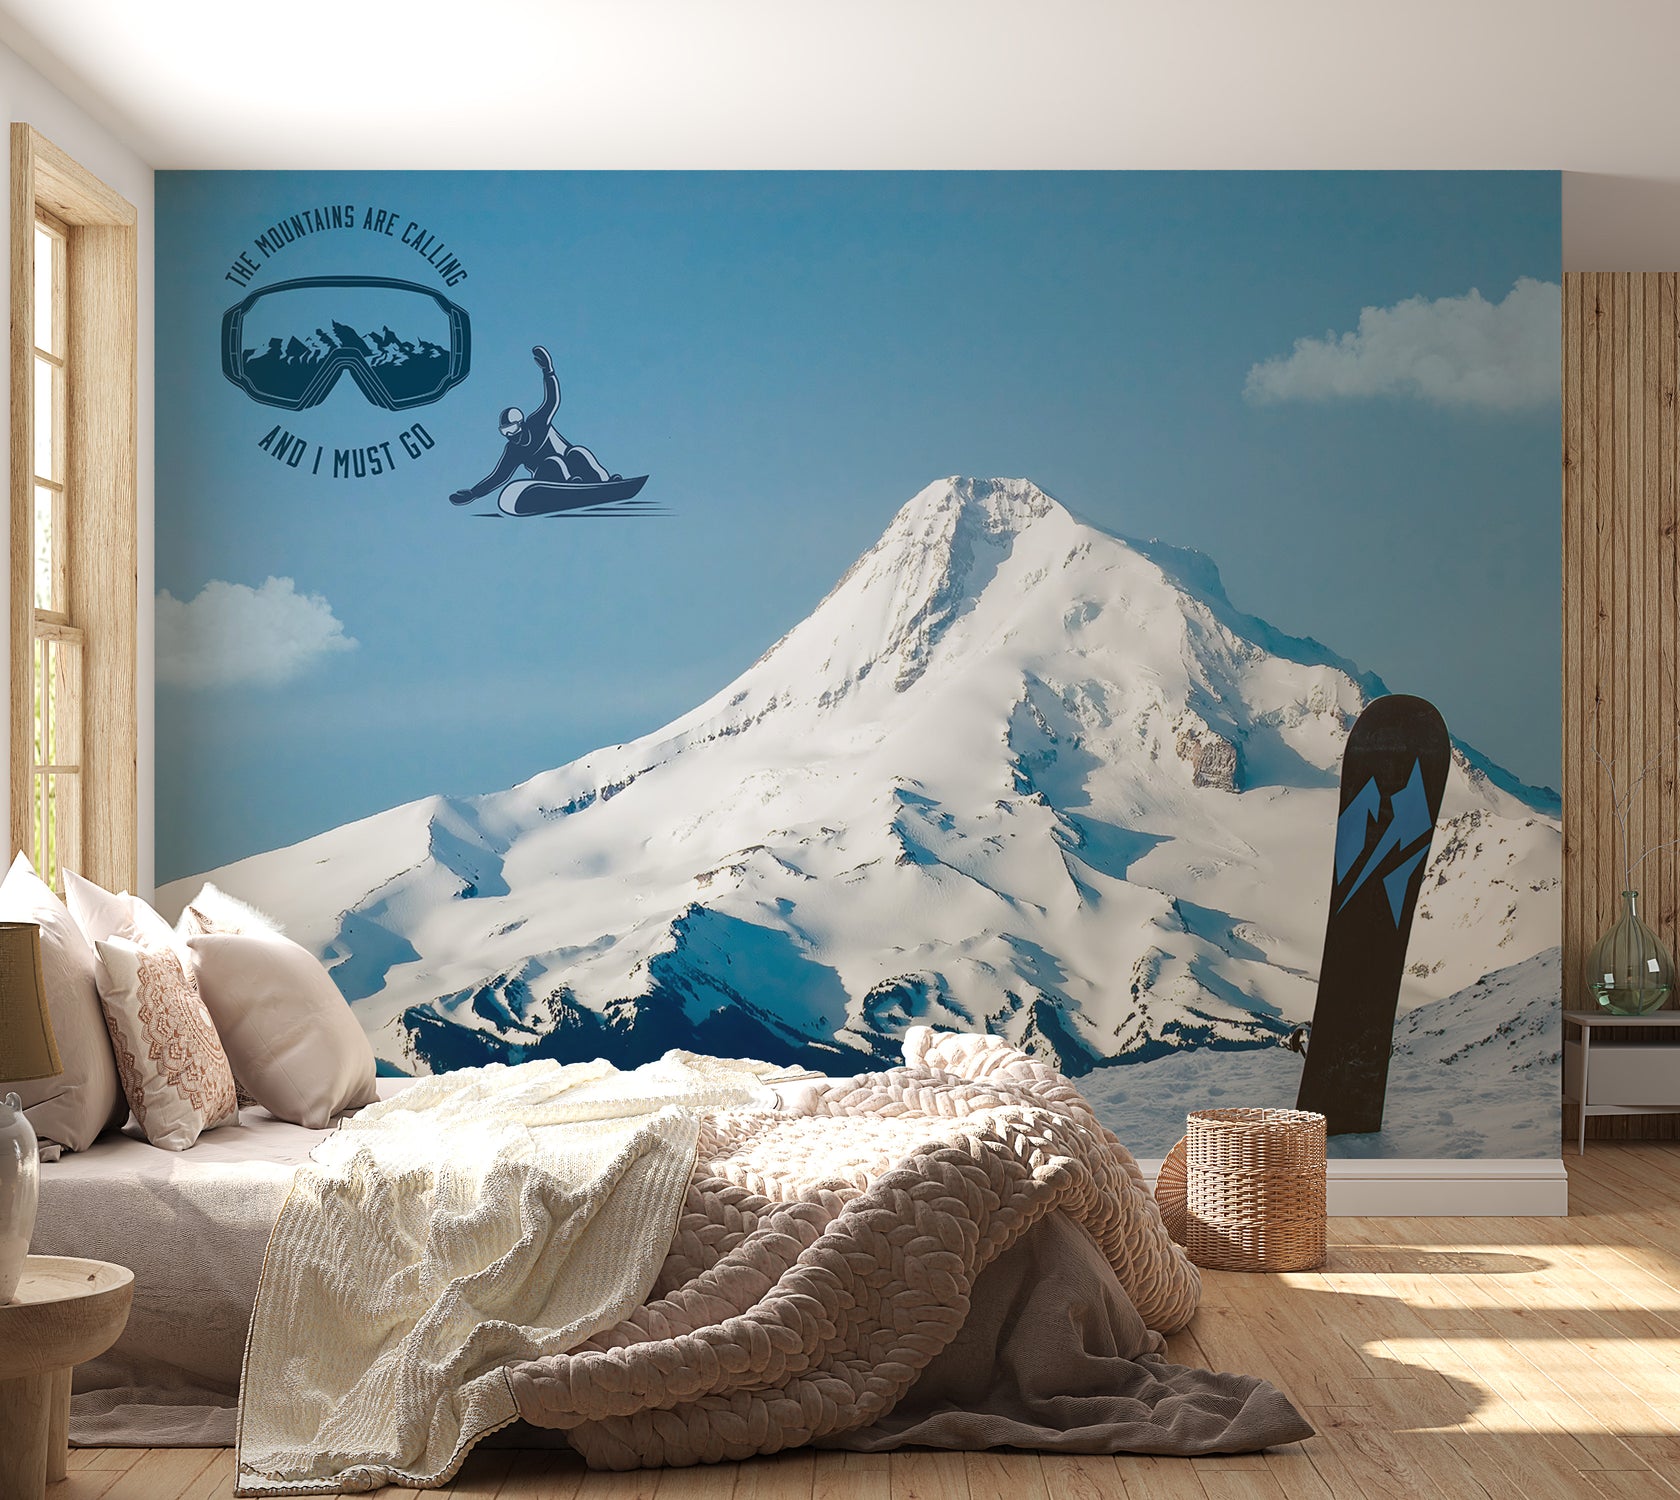 Peel & Stick Landscape Wall Mural - Snowboarding - Removable Wall Decals-Tiptophomedecor